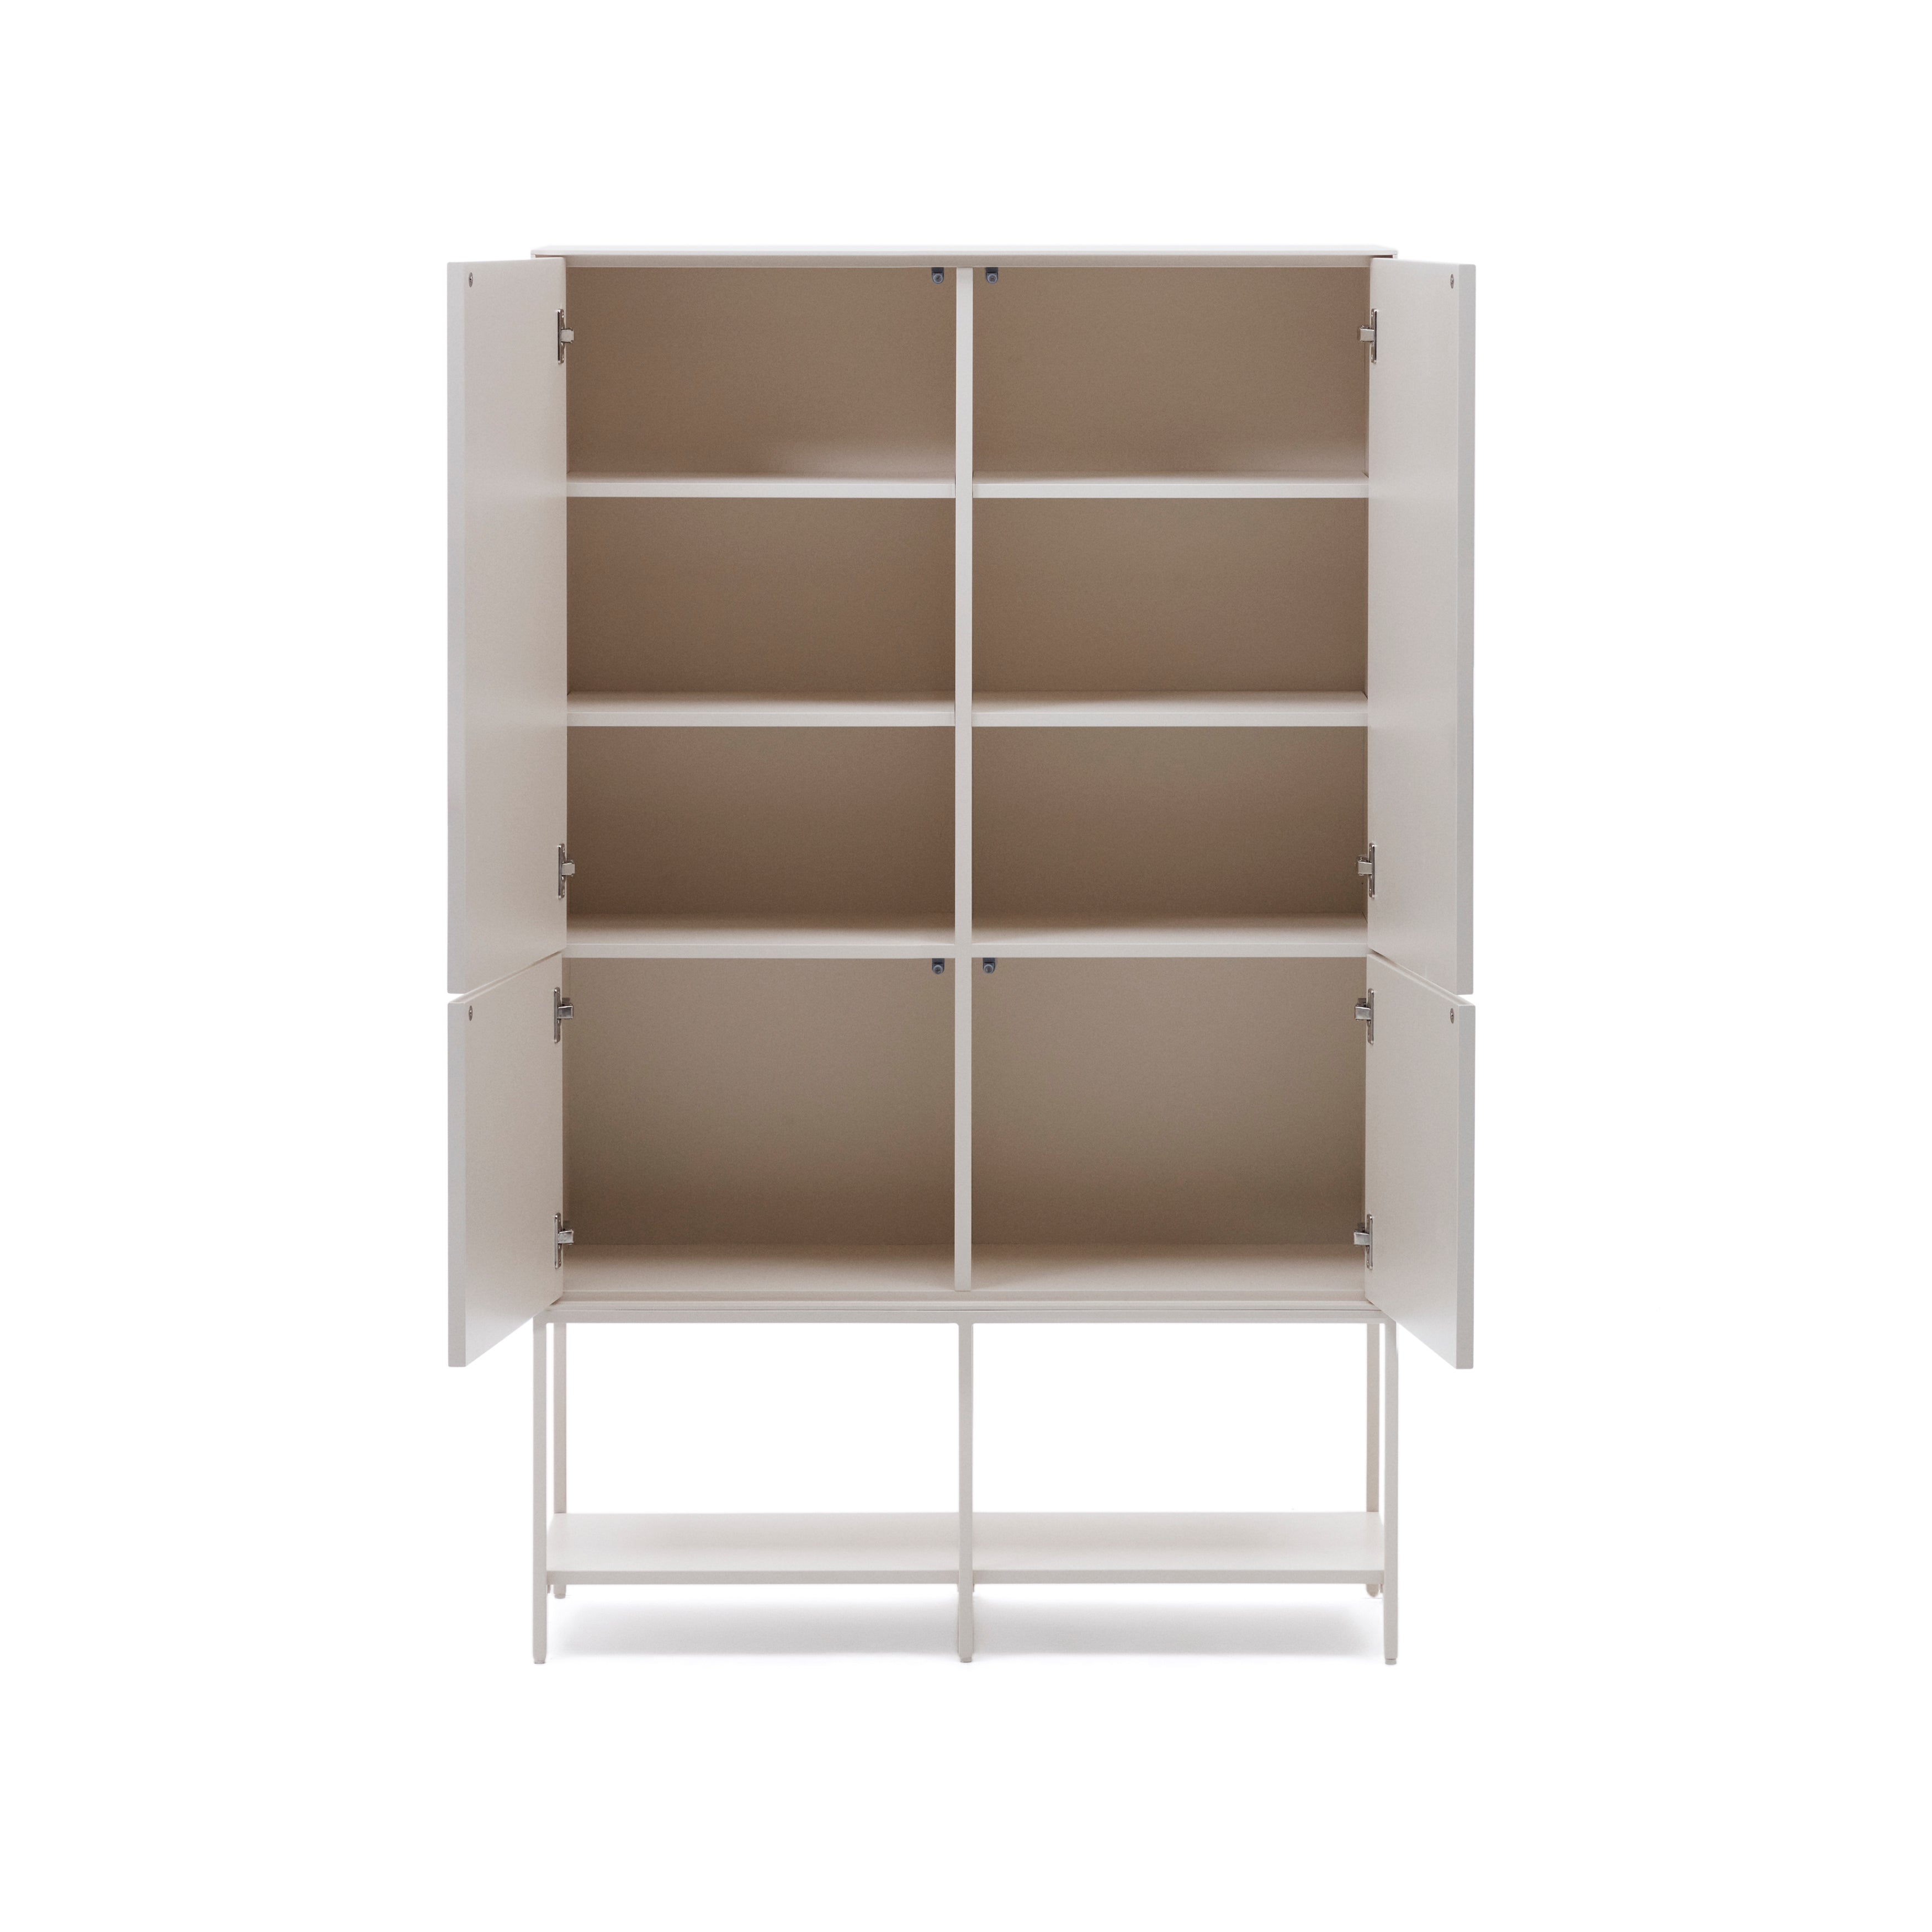 Vedrana 4-door sideboard white lacquered MDF 97.5 x 160 cm